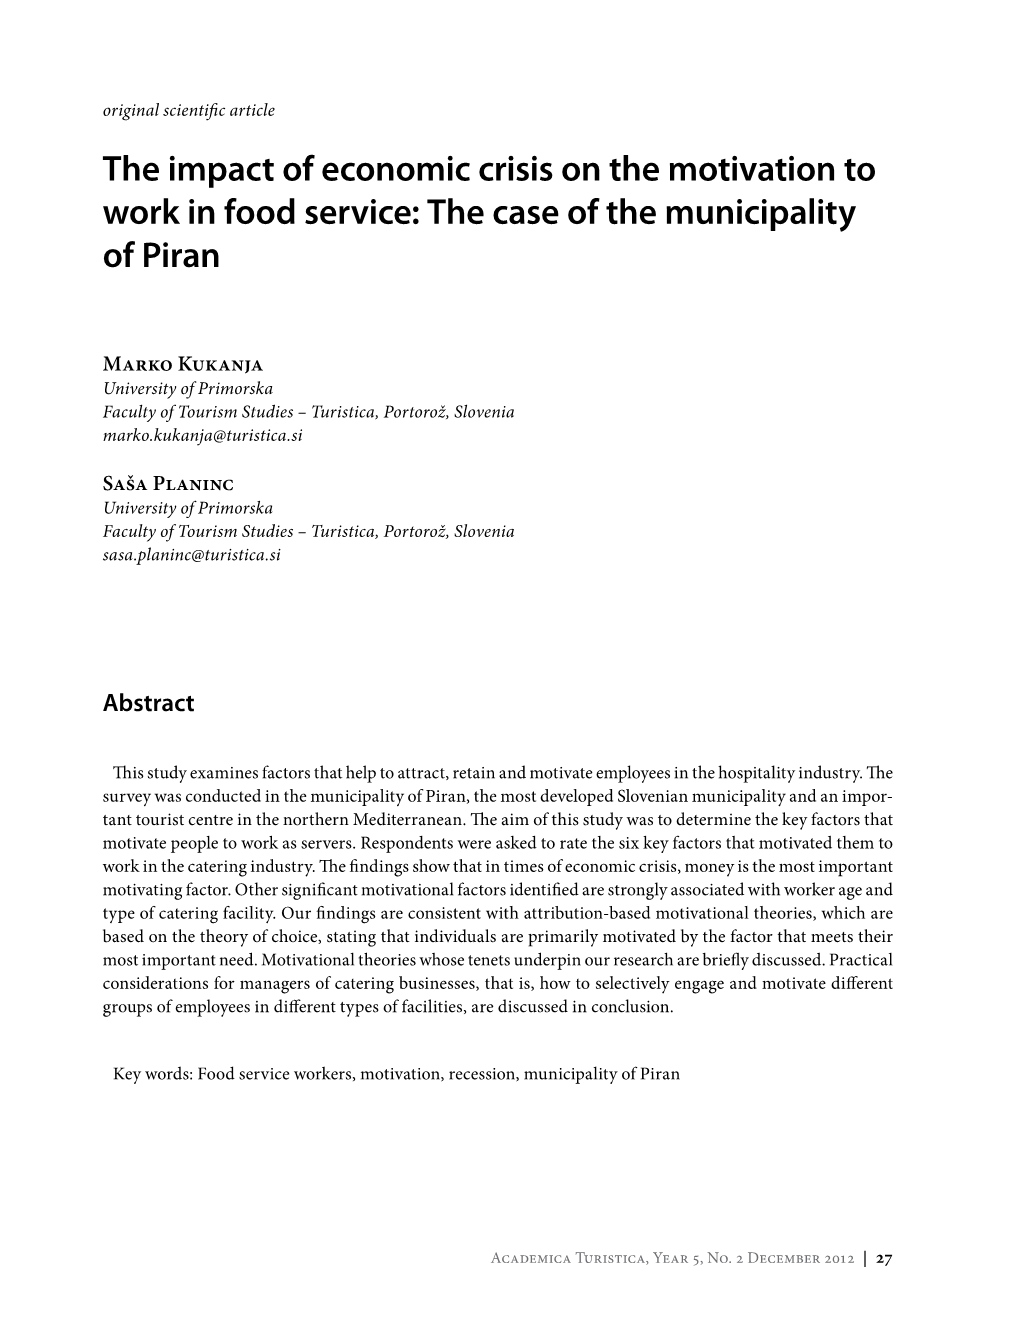 The Impact of Economic Crisis on the Motivation to Work in Food Service: the Case of the Municipality of Piran